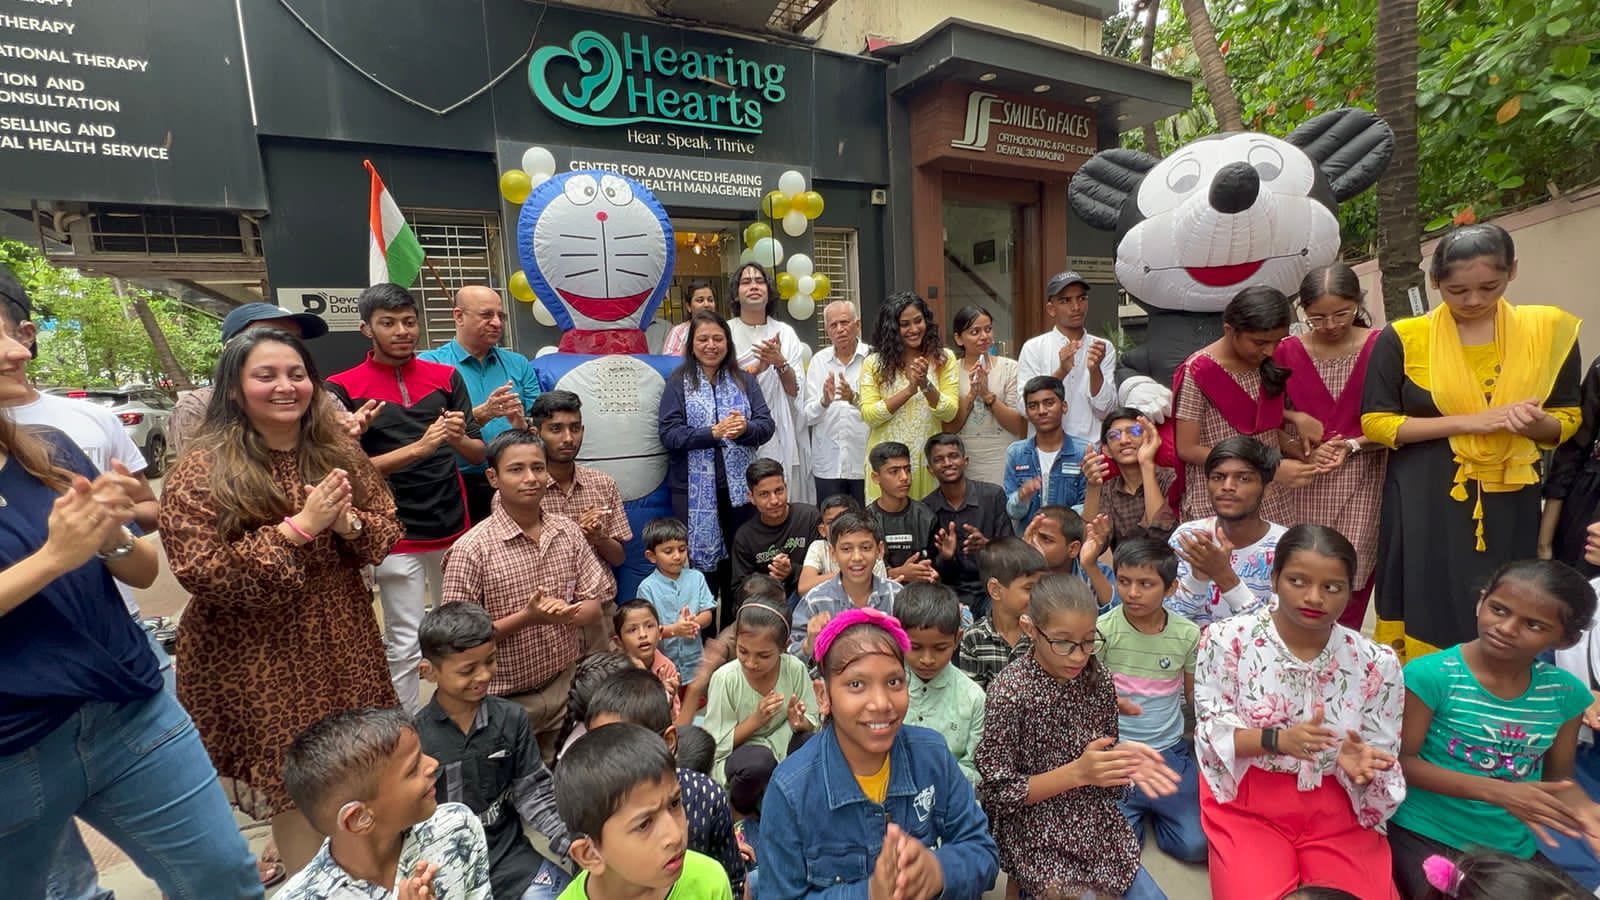 Hearing Hearts hosted a unique celebration under #NoMatterWhat, uniting children with and without hearing impairments to showcase boundless unity and compassion